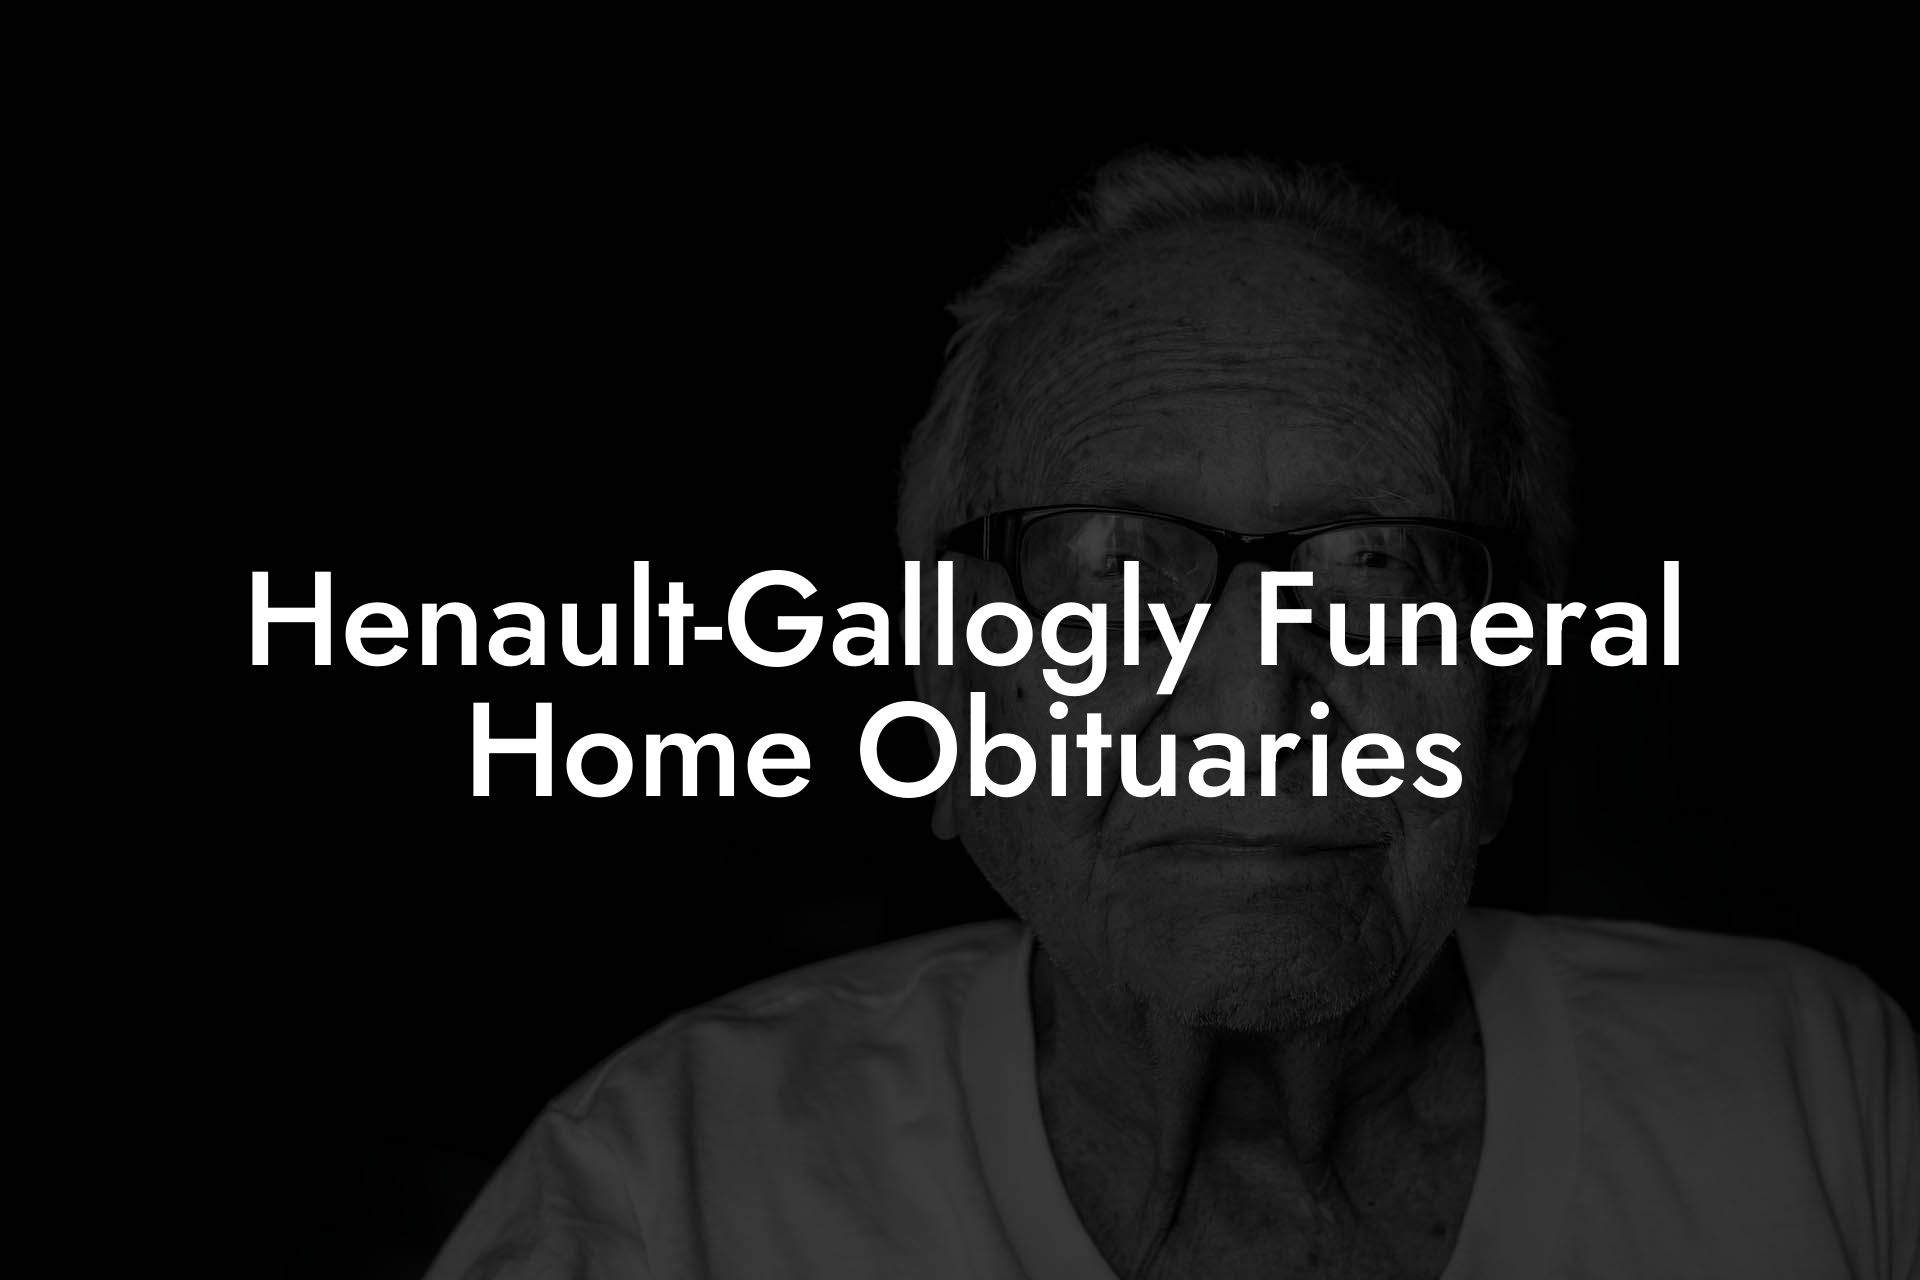 Henault-Gallogly Funeral Home Obituaries